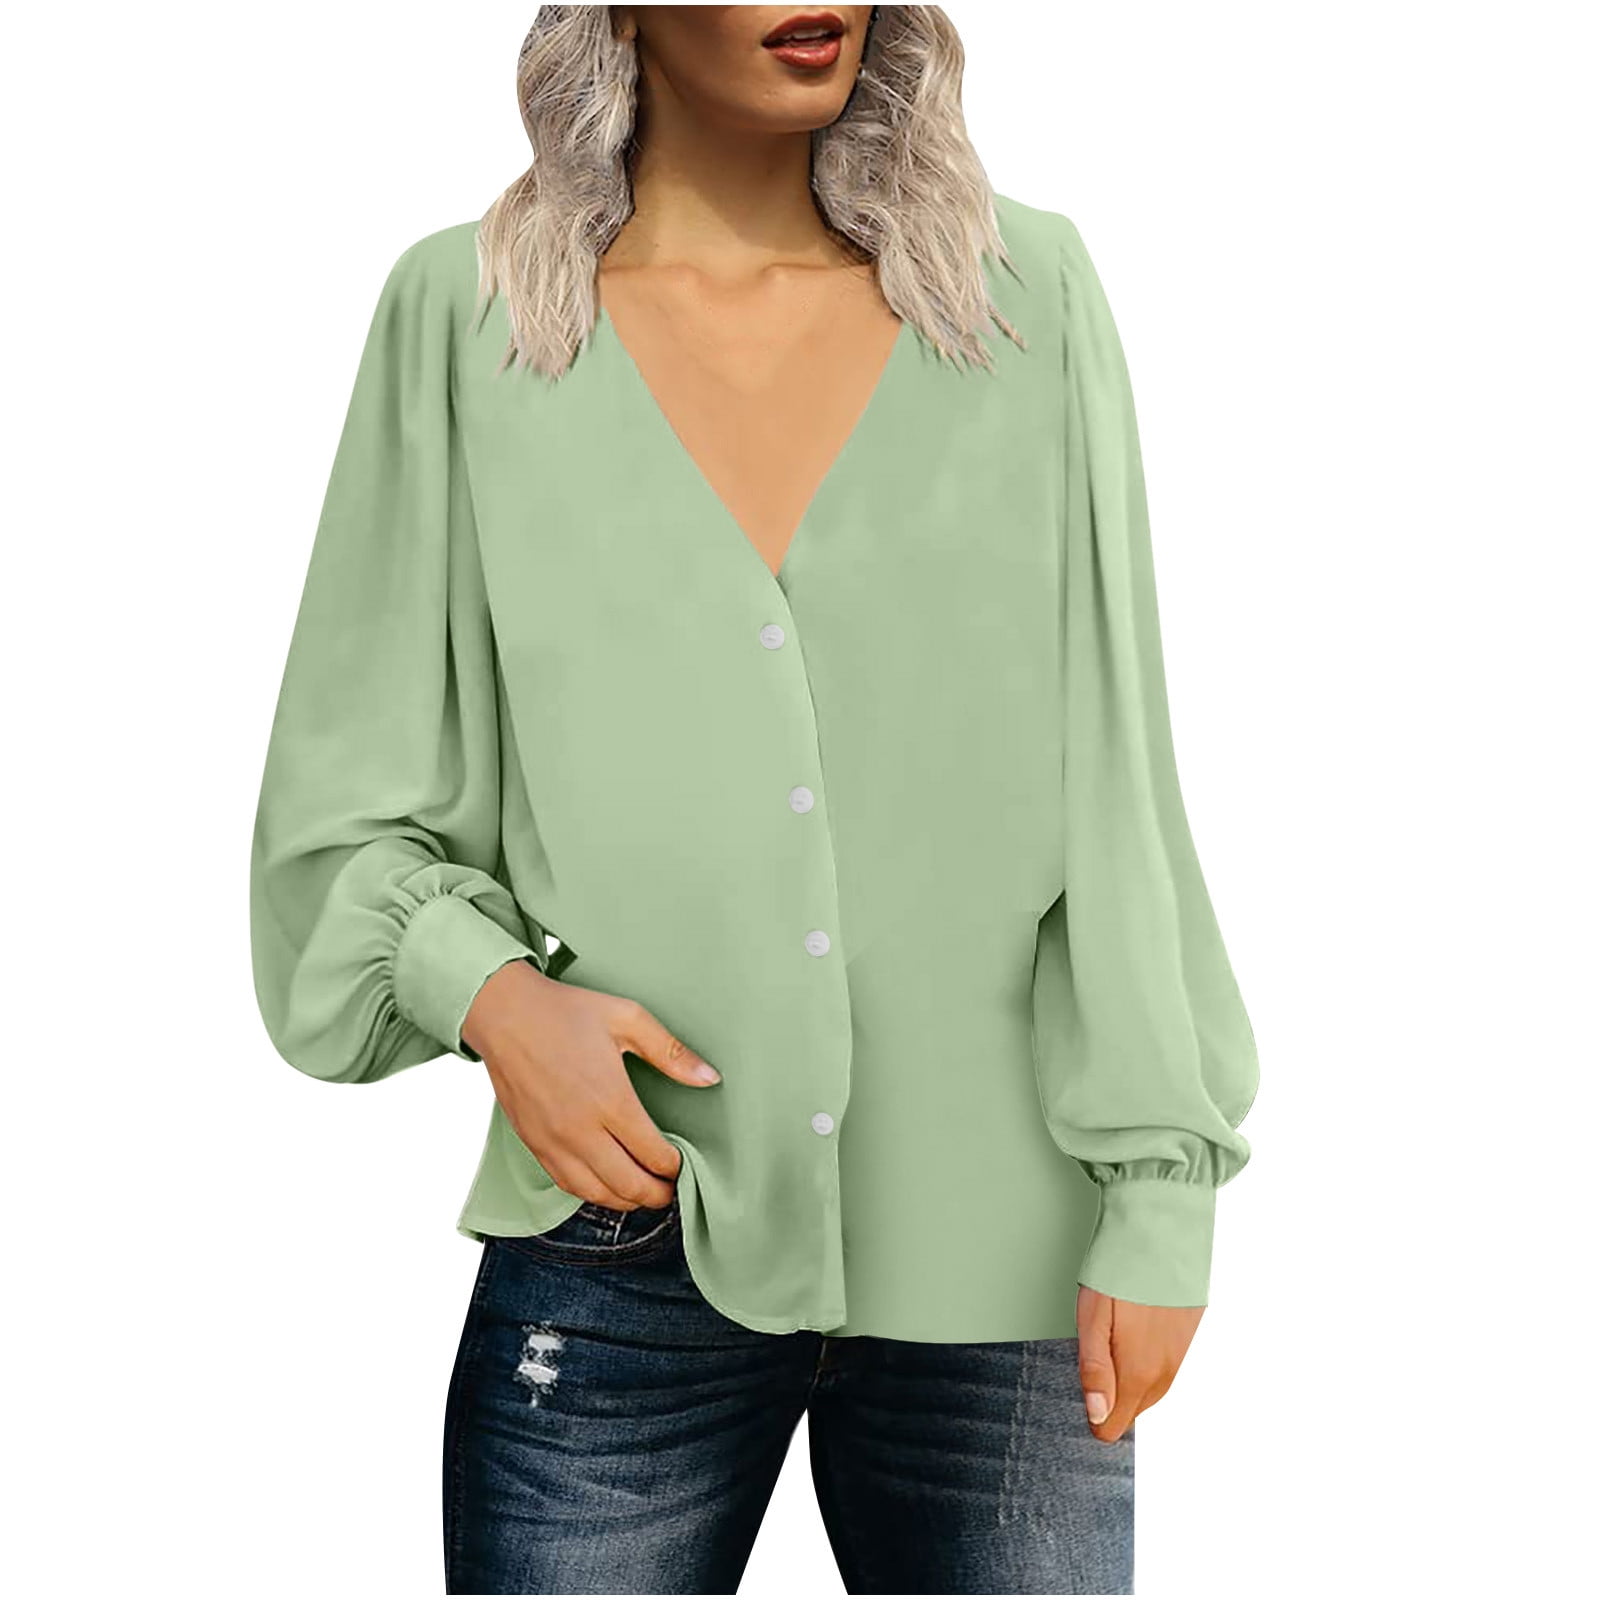 tklpehg Western Tops for Women Loose Soft Blouse V-Neck Button